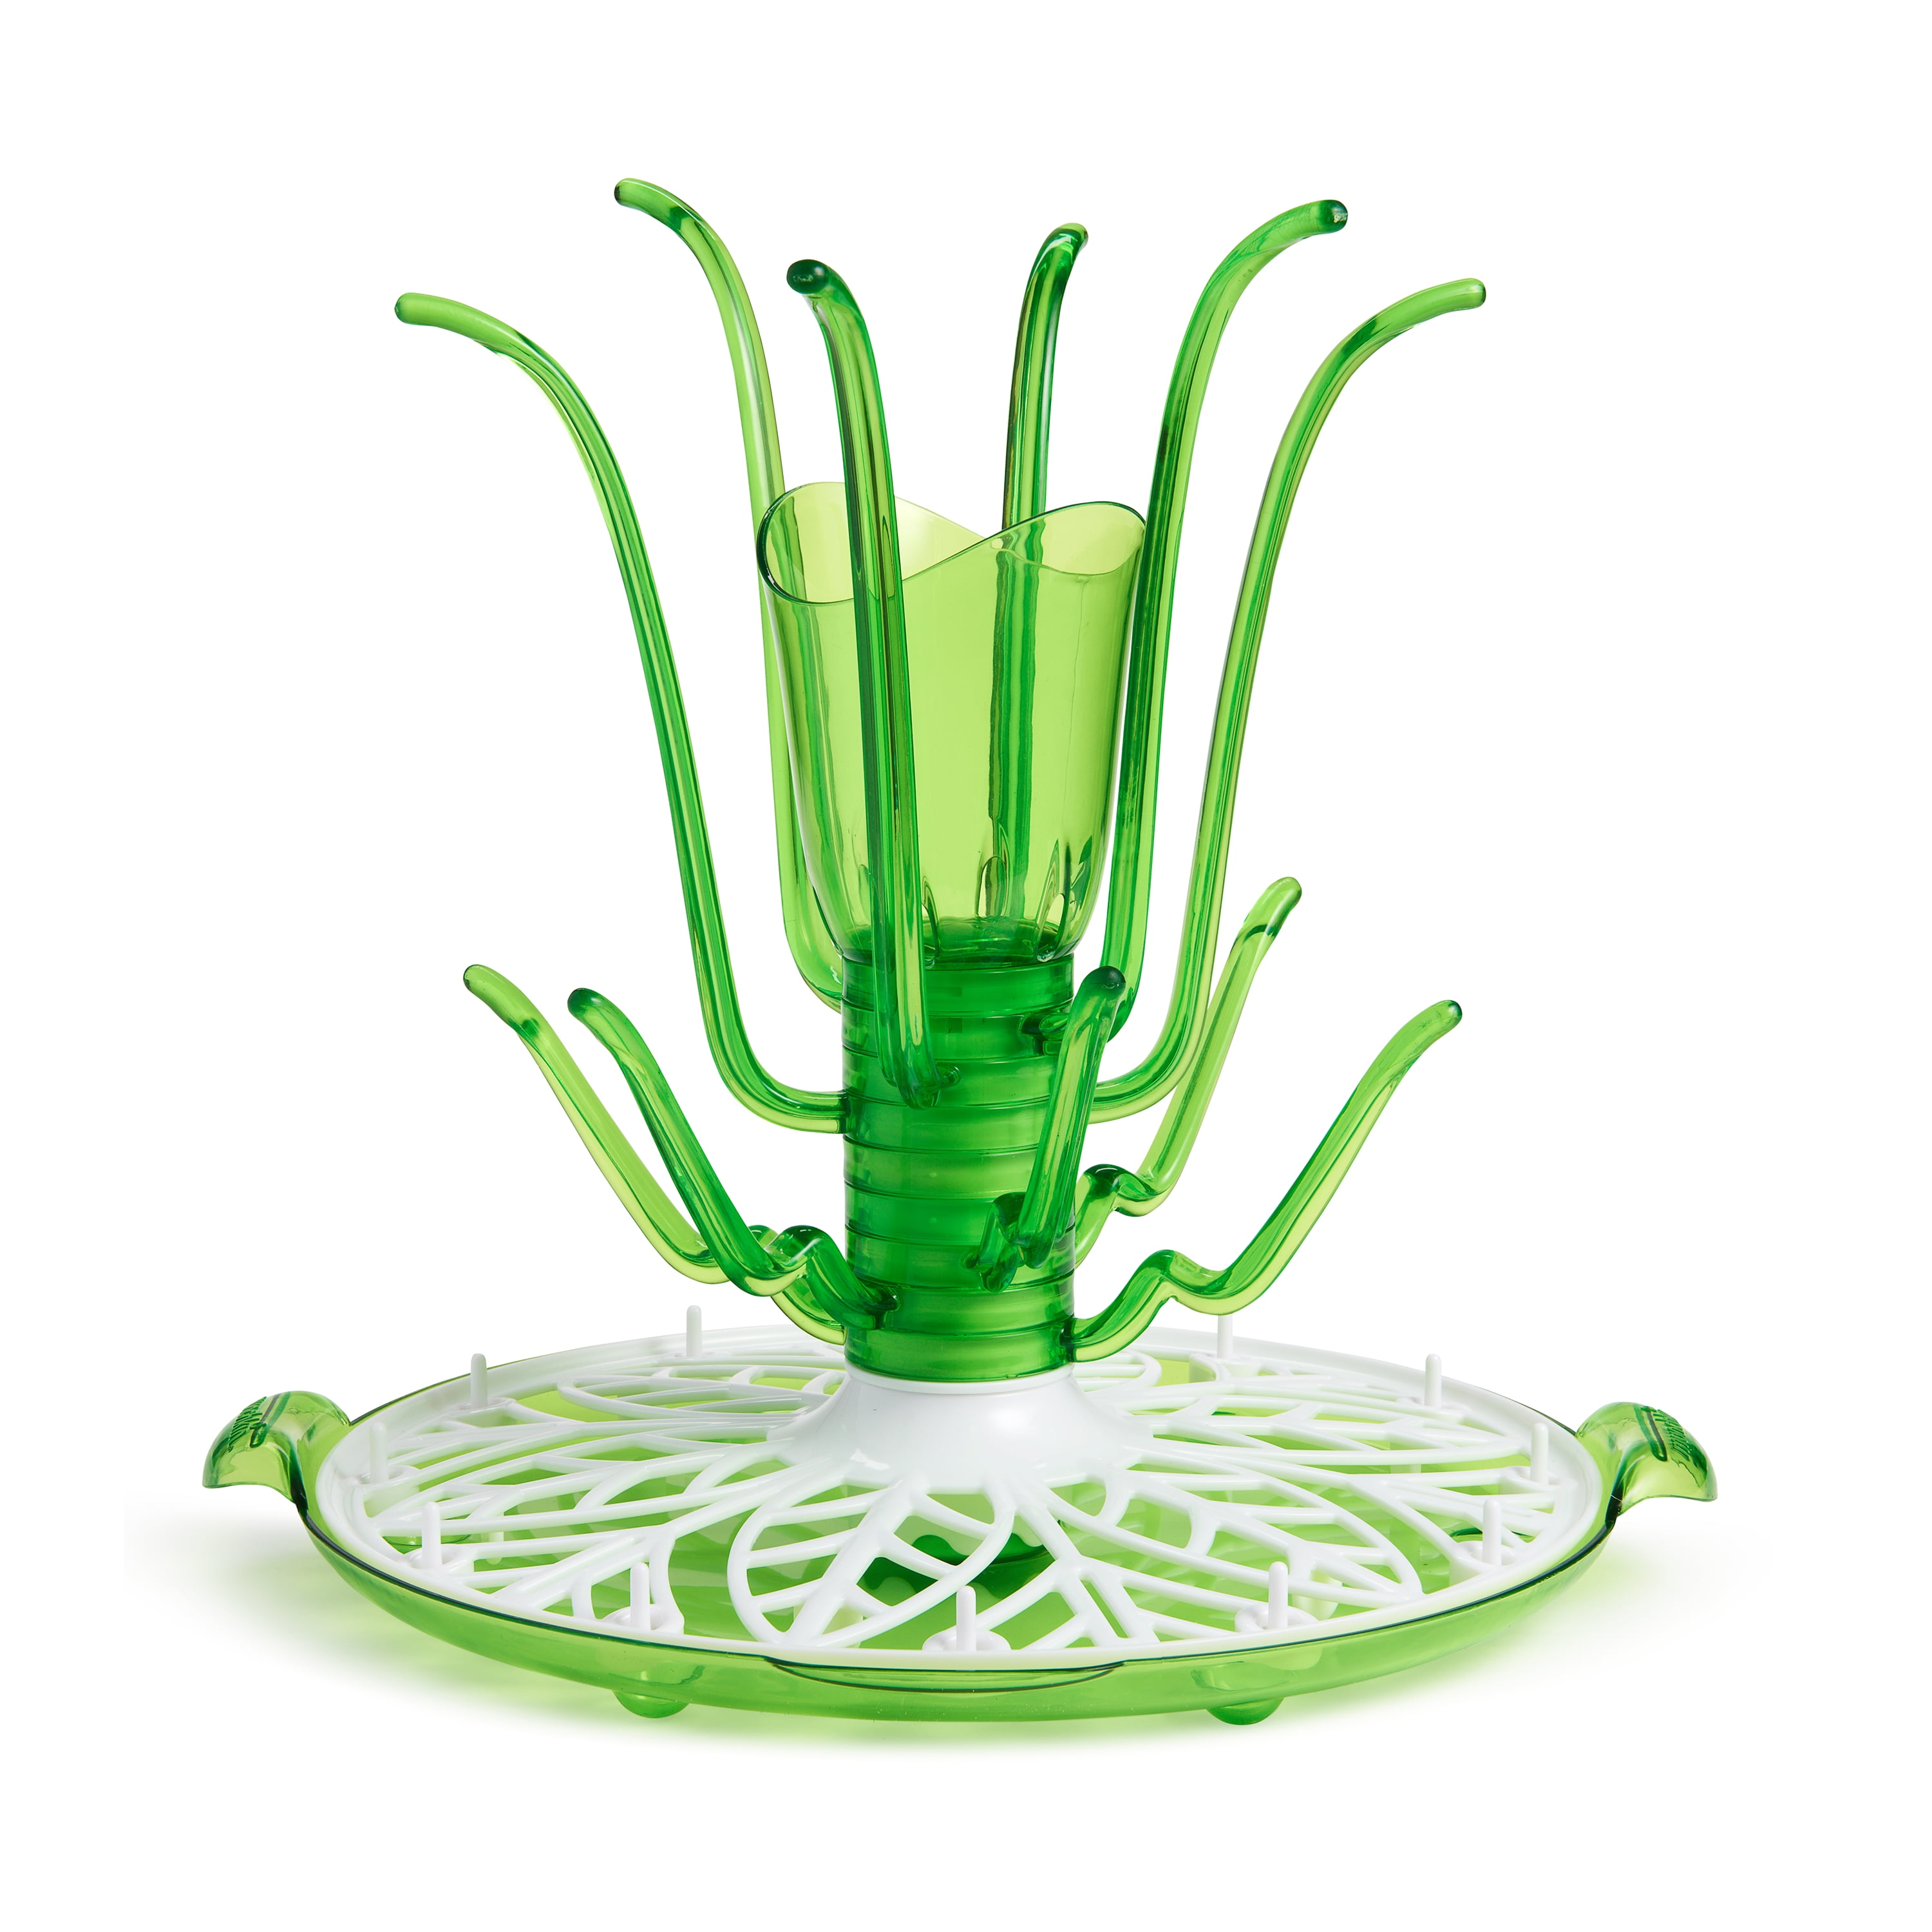 Munchkin Bottle Drying Rack, Assorted Colors - Shop Cleaning at H-E-B